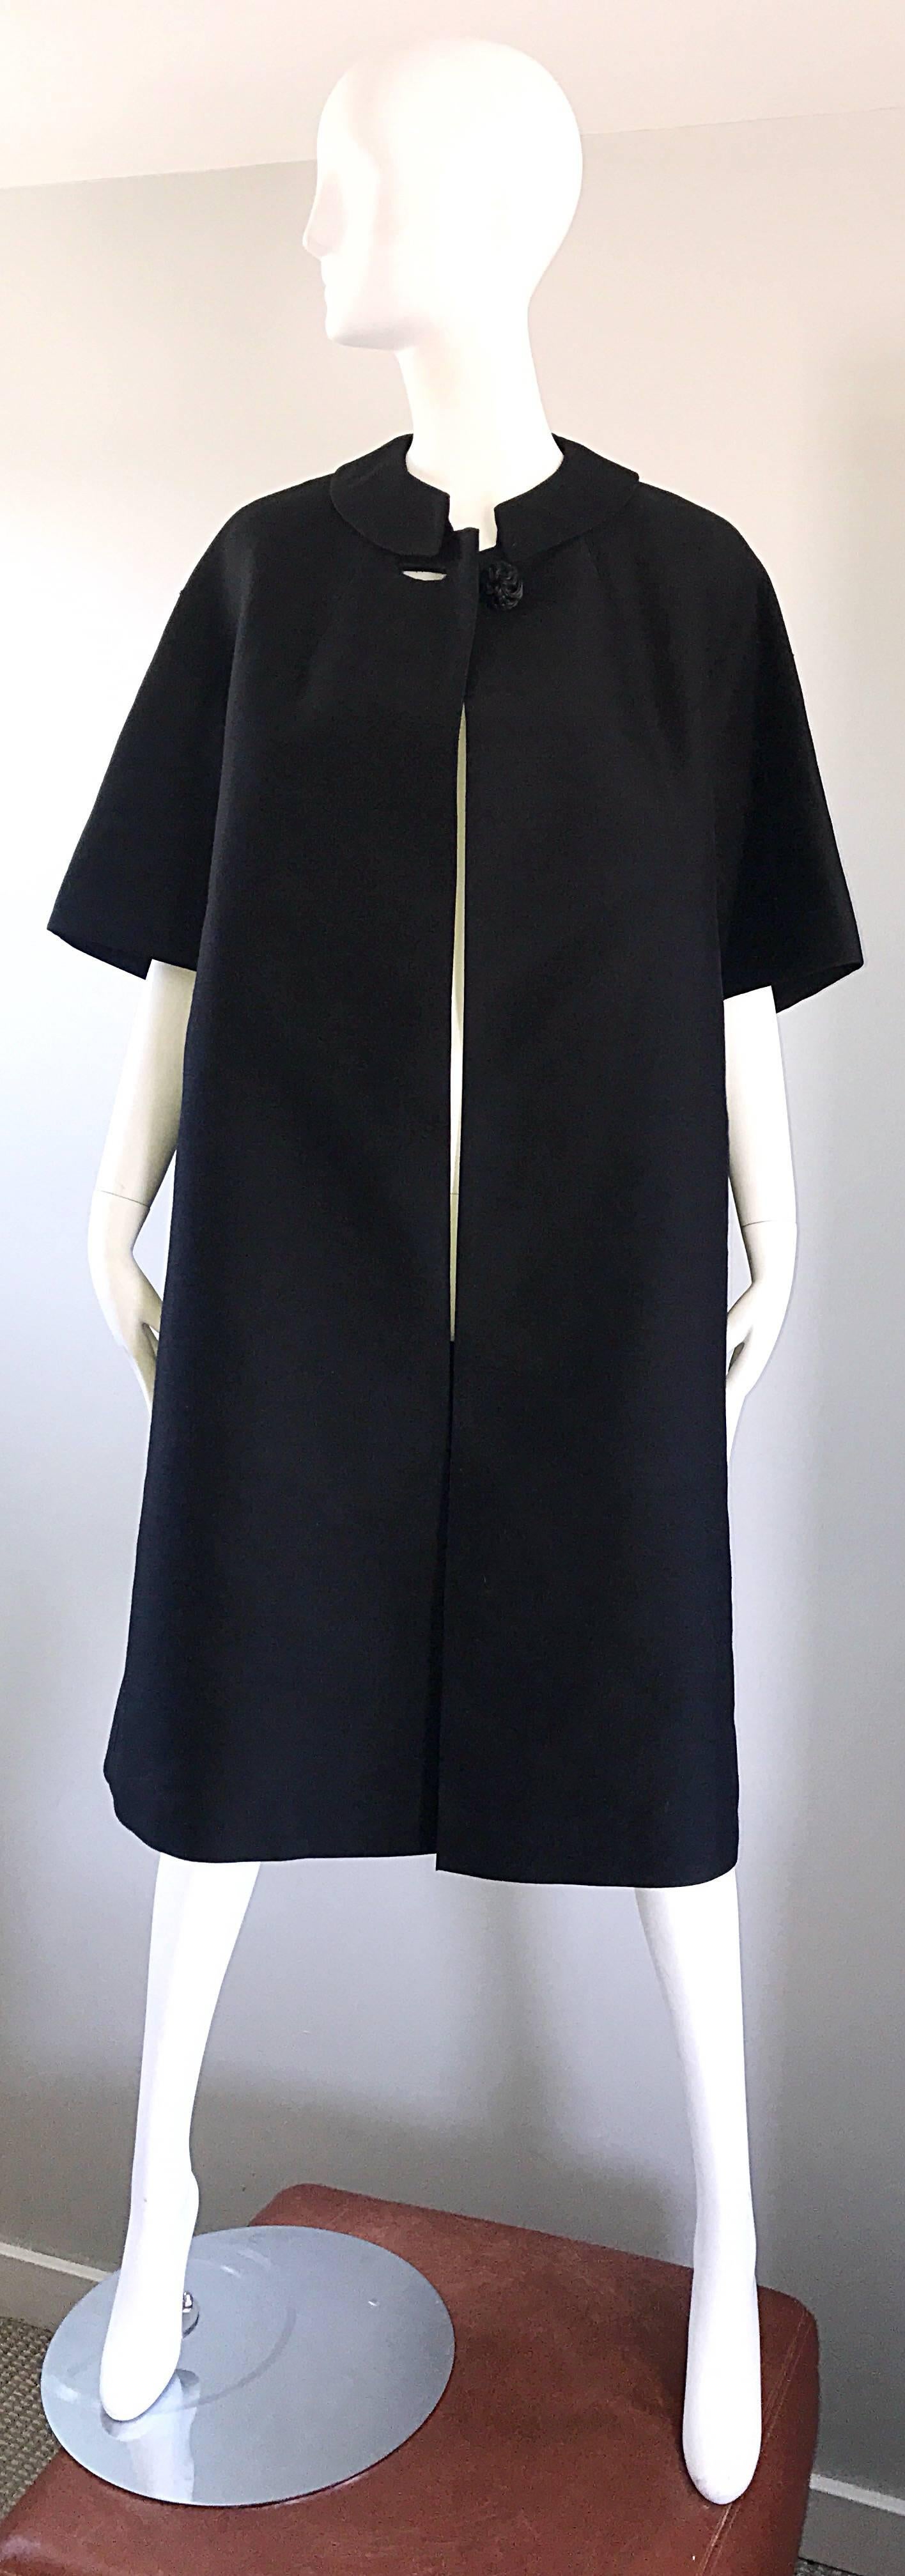 1950s Betty Rose Black 3/4 Sleeves 50s Vintage Trapeze Swing Opera Jacket In Excellent Condition For Sale In San Diego, CA